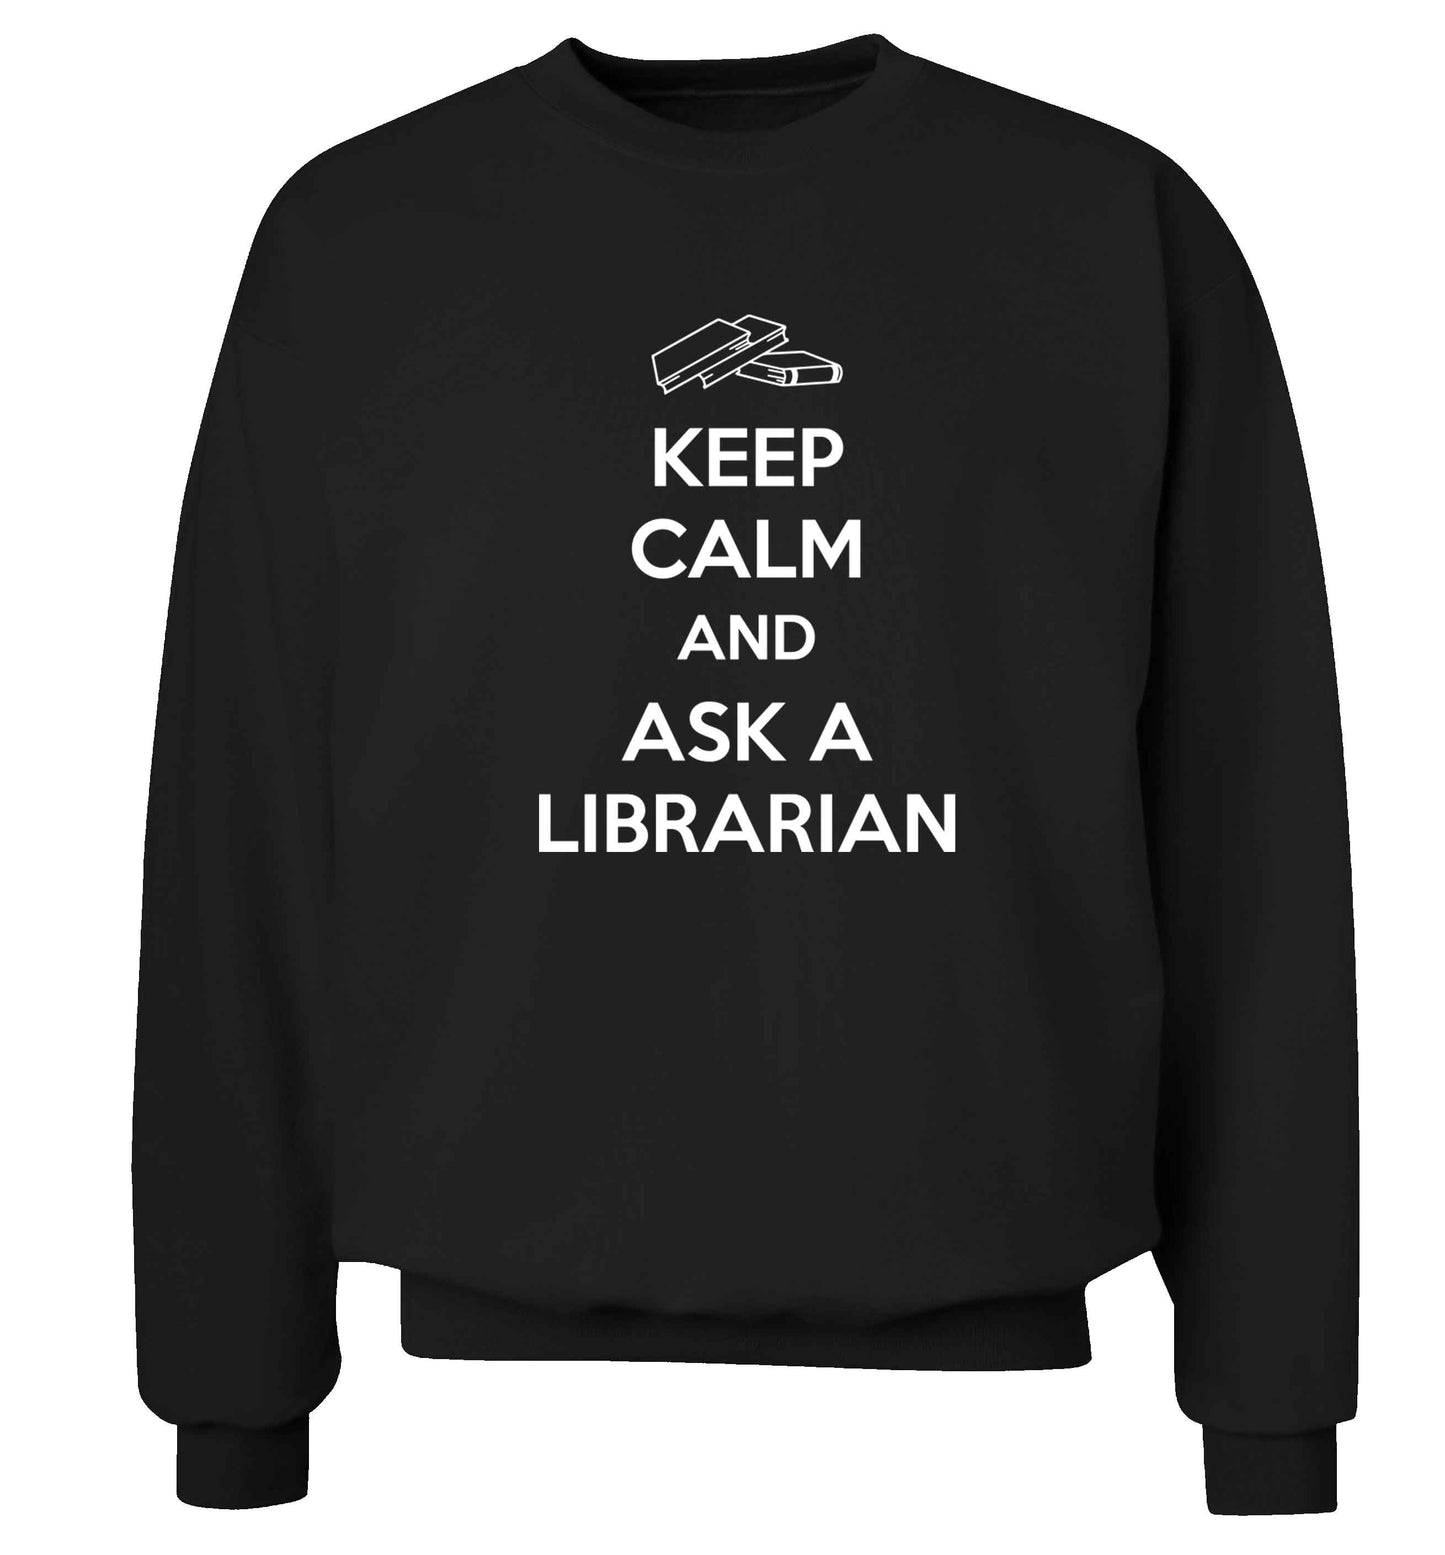 Keep calm and ask a librarian Adult's unisex black Sweater 2XL